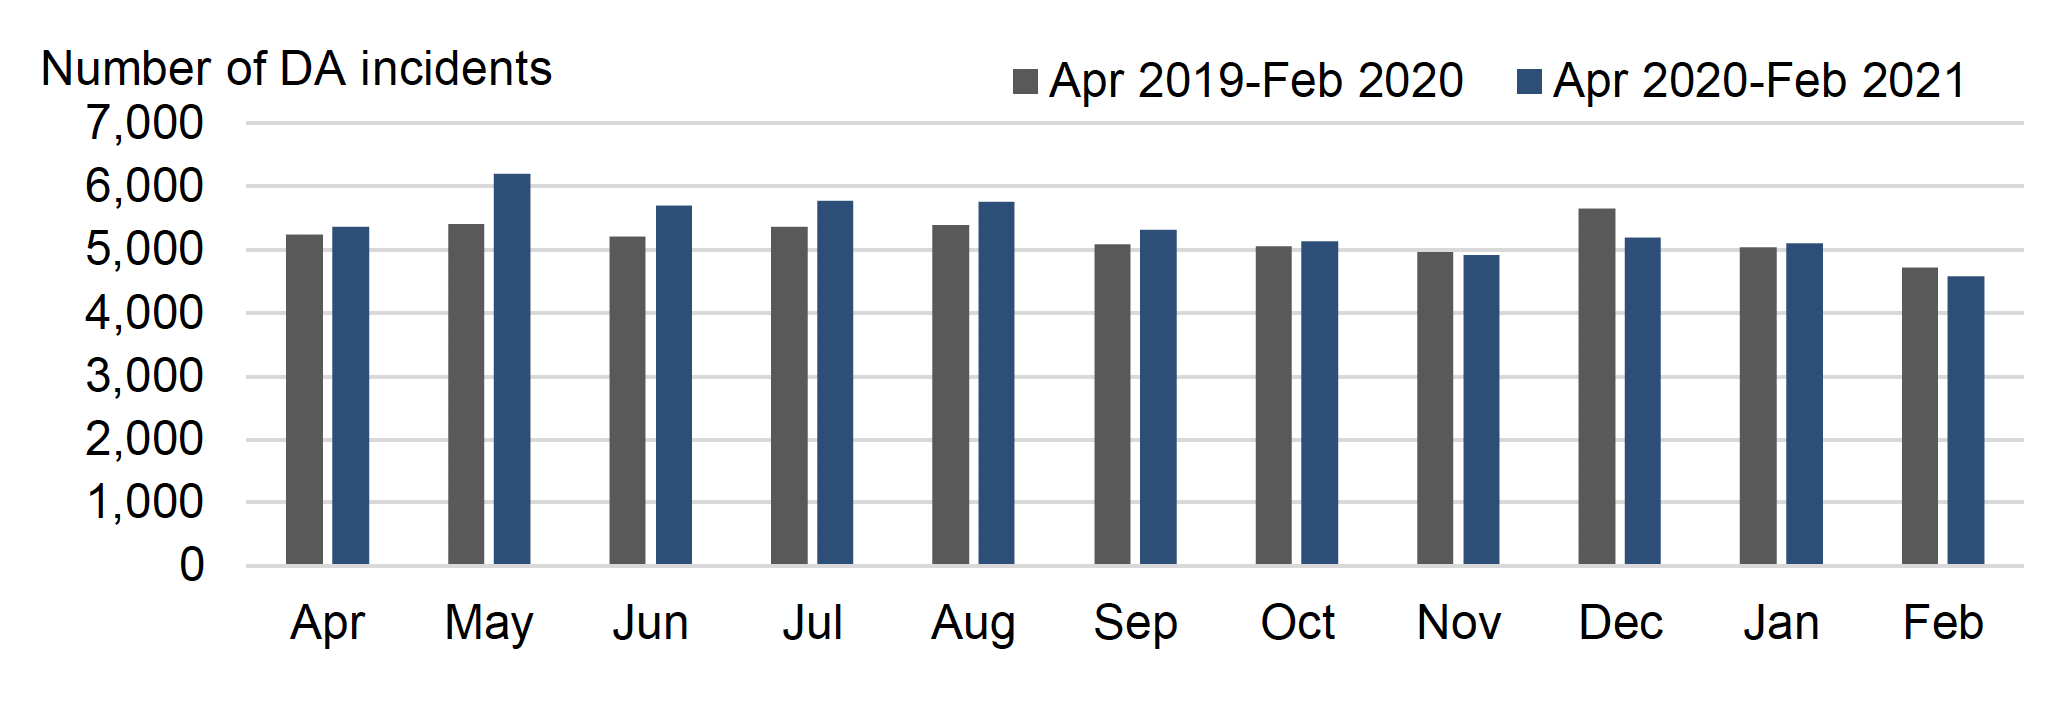 Bar chart showing monthly domestic abuse incidents from April 2020 to February 2021.